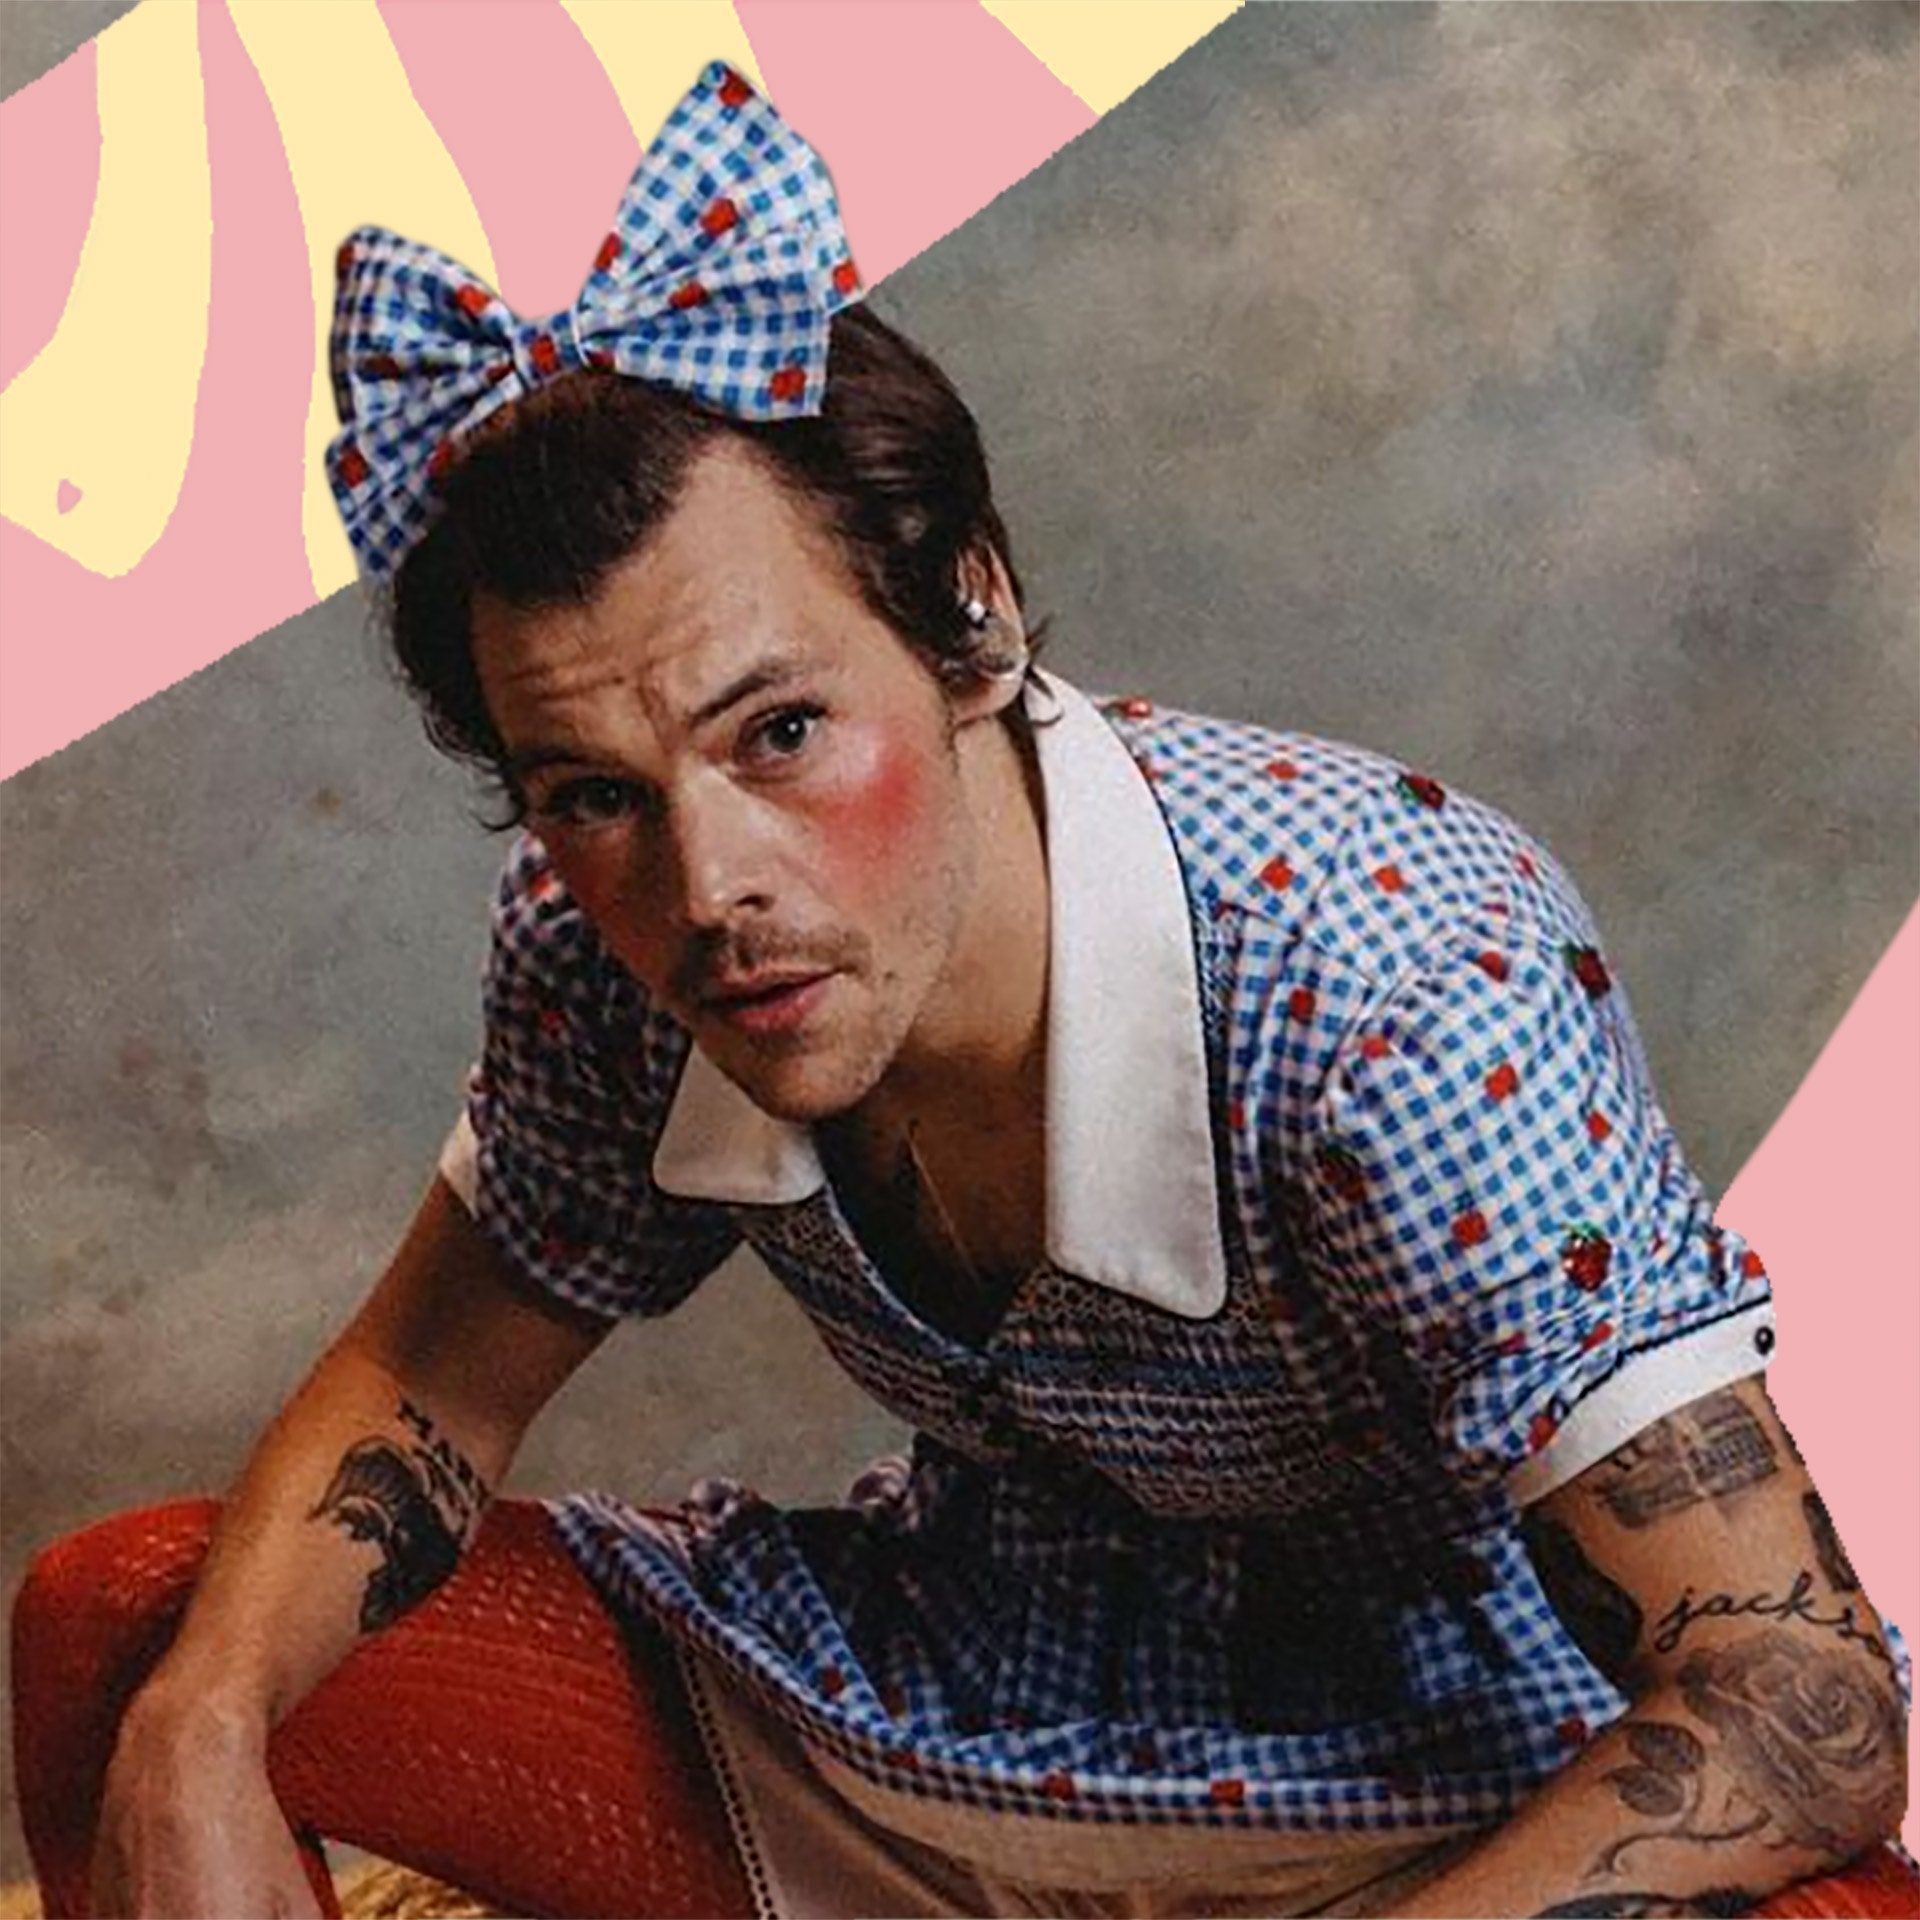 Harry Styles wears a blue gingham dress, red lip, and a blue bow in his hair in the 